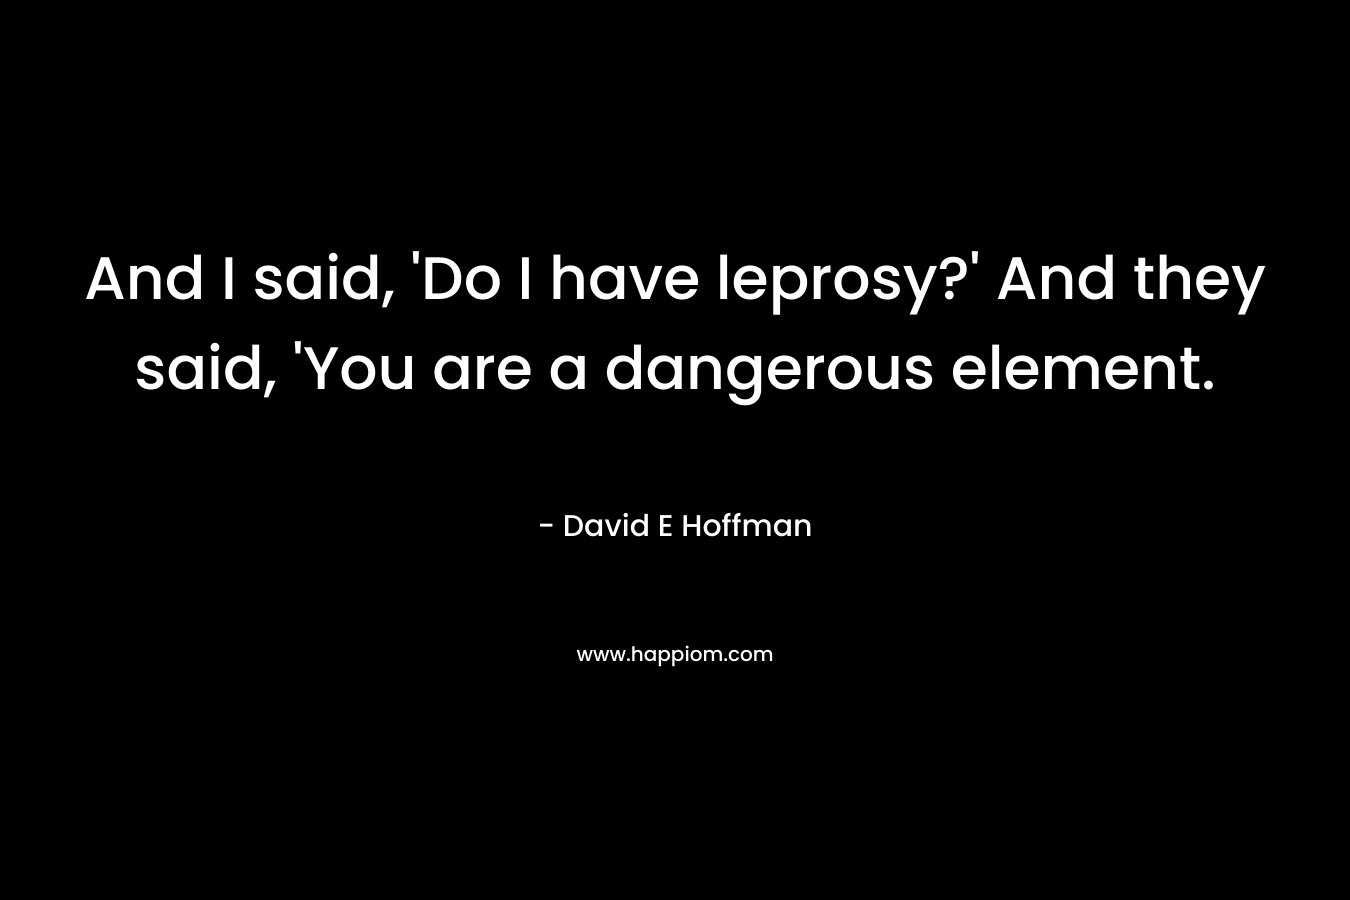 And I said, ‘Do I have leprosy?’ And they said, ‘You are a dangerous element. – David E Hoffman